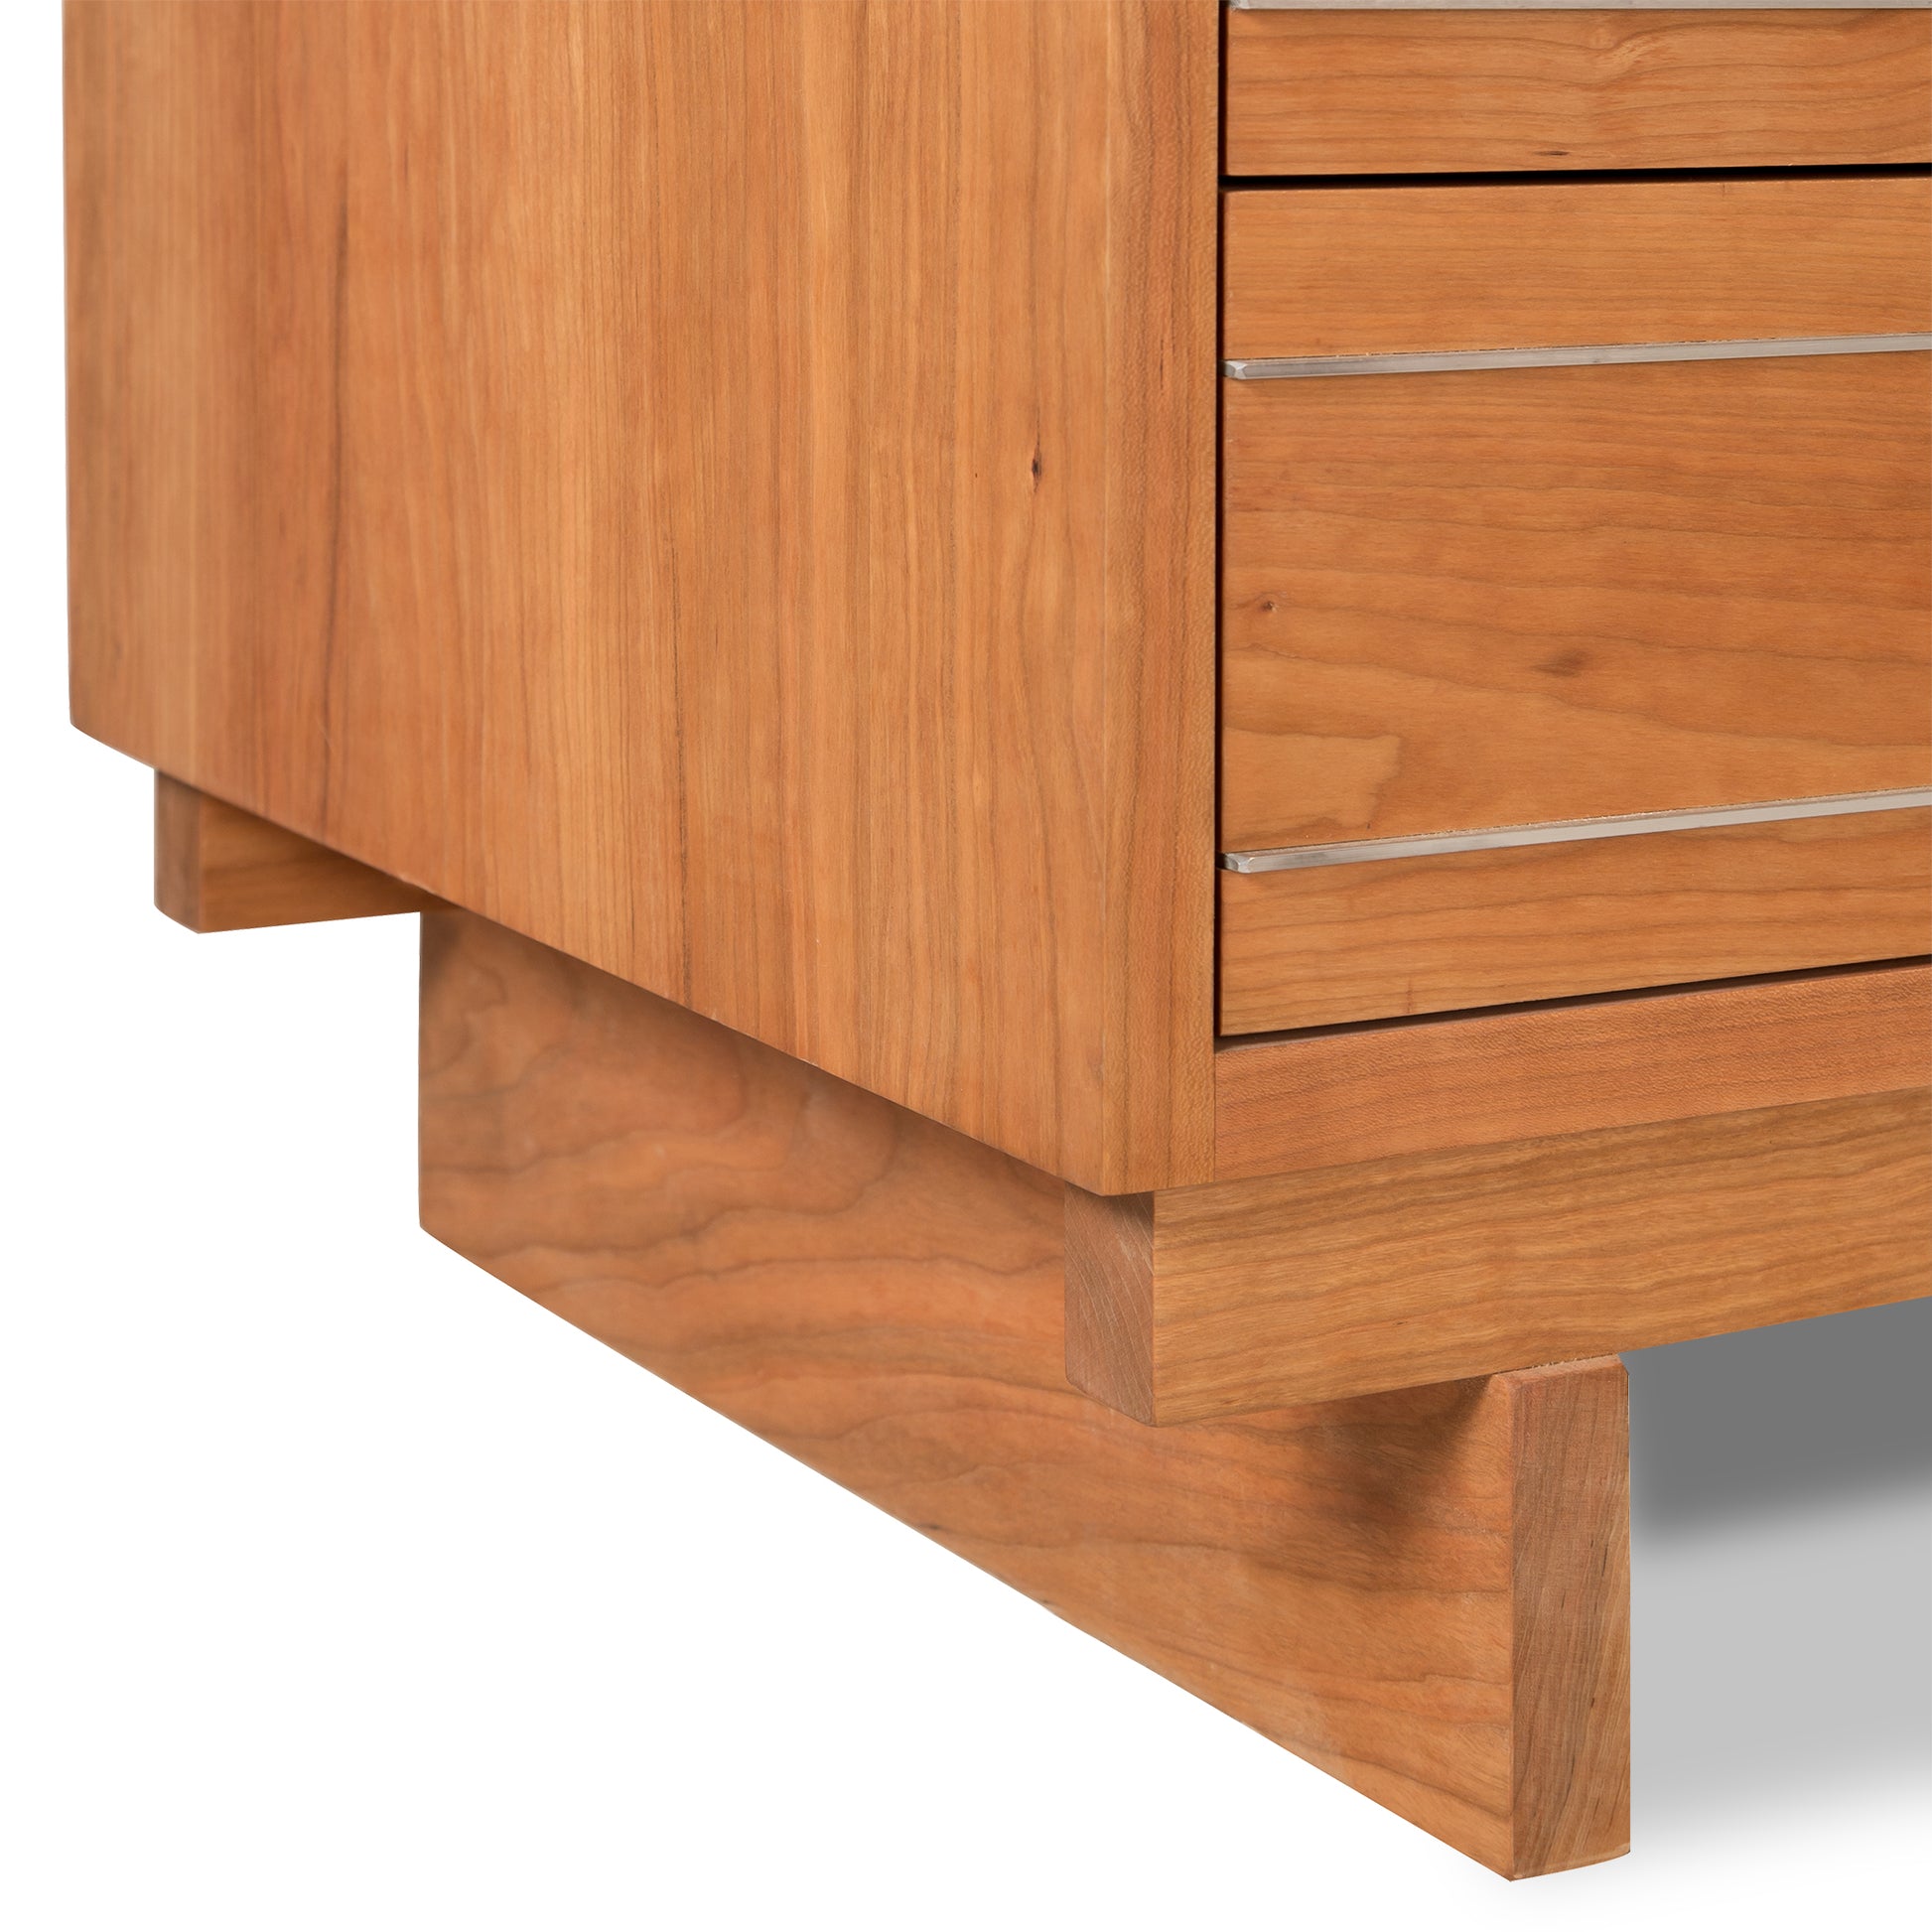 Solid wood chest with four drawers, featuring a flush design with horizontal handles, standing on a solid base with a plinth-like construction by Vermont Furniture Designs.